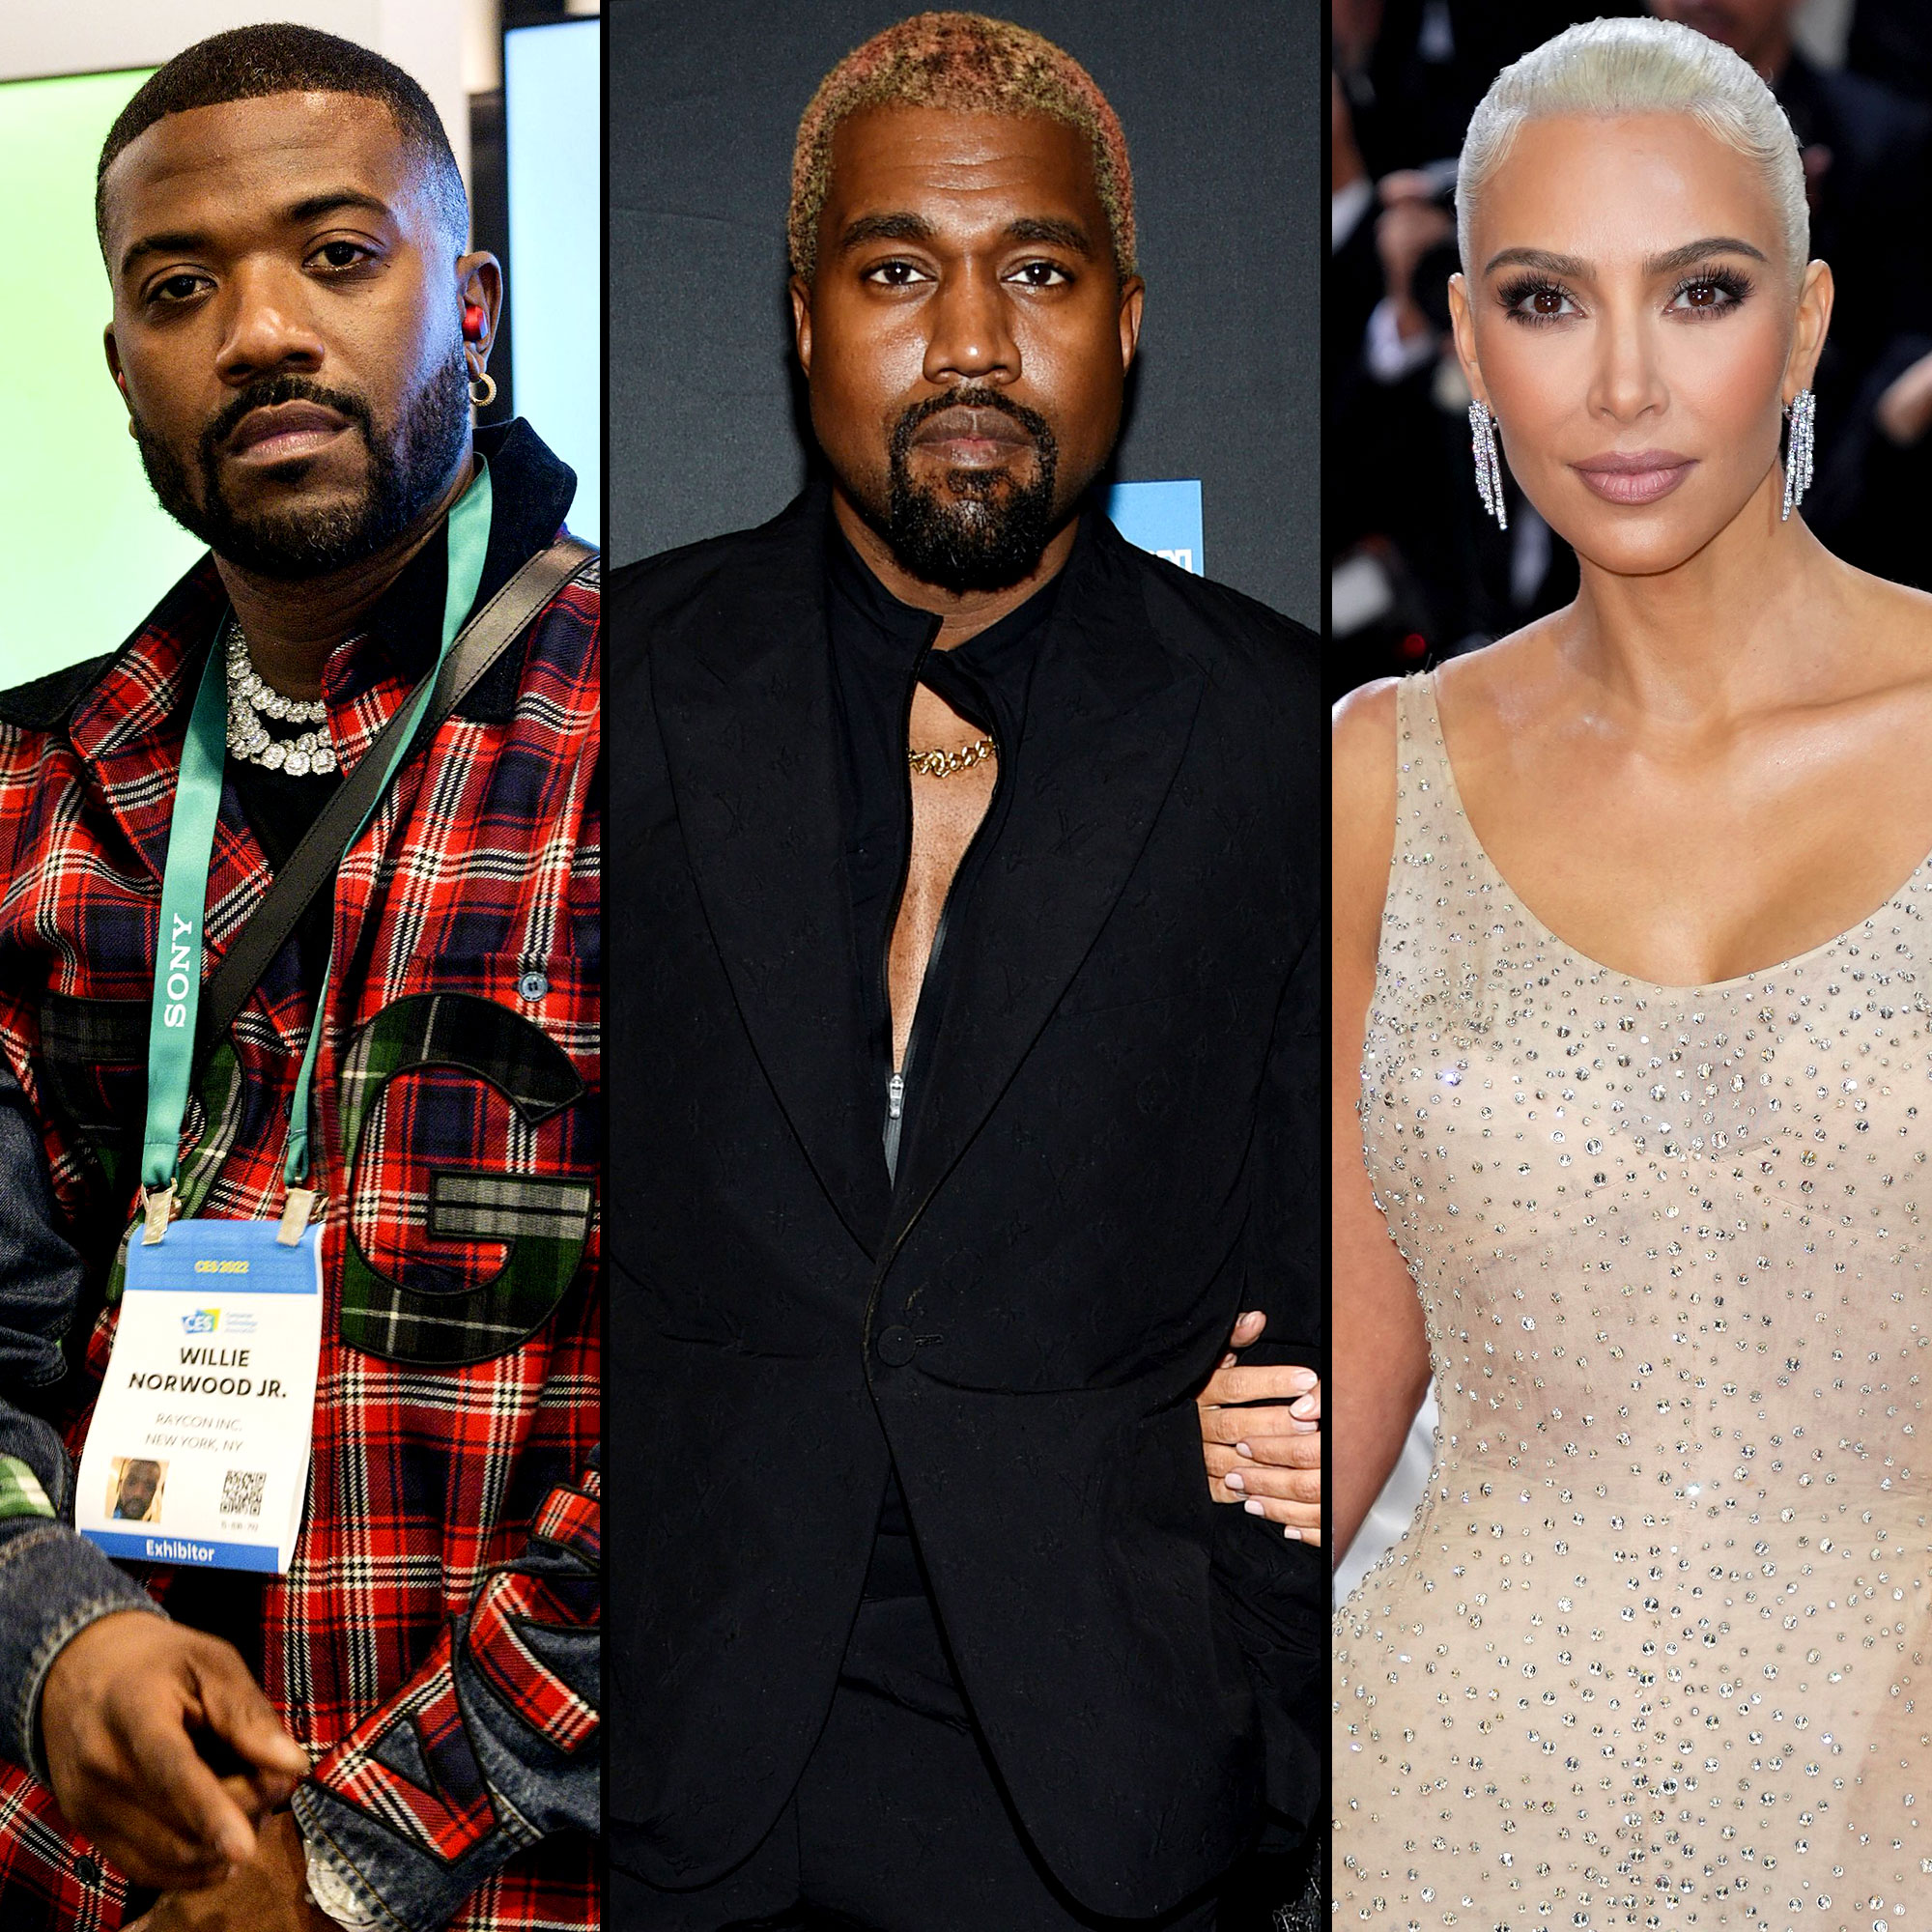 Ray J Details Meet-Up With Kanye West Over Kim Kardashian Sex Tape